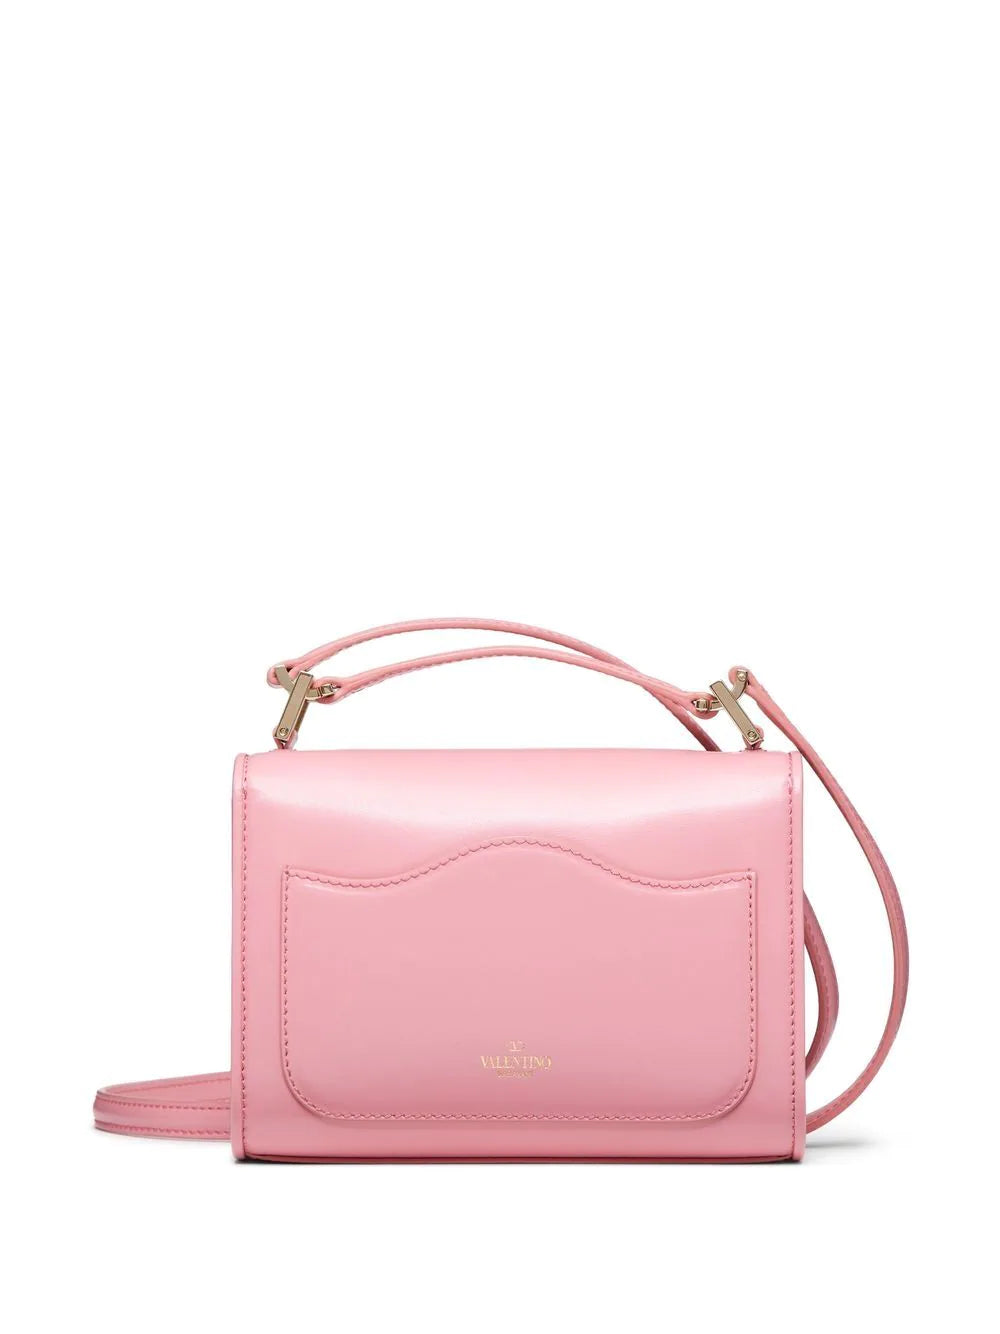 RED Valentino Signature Crossbody Bags for Women